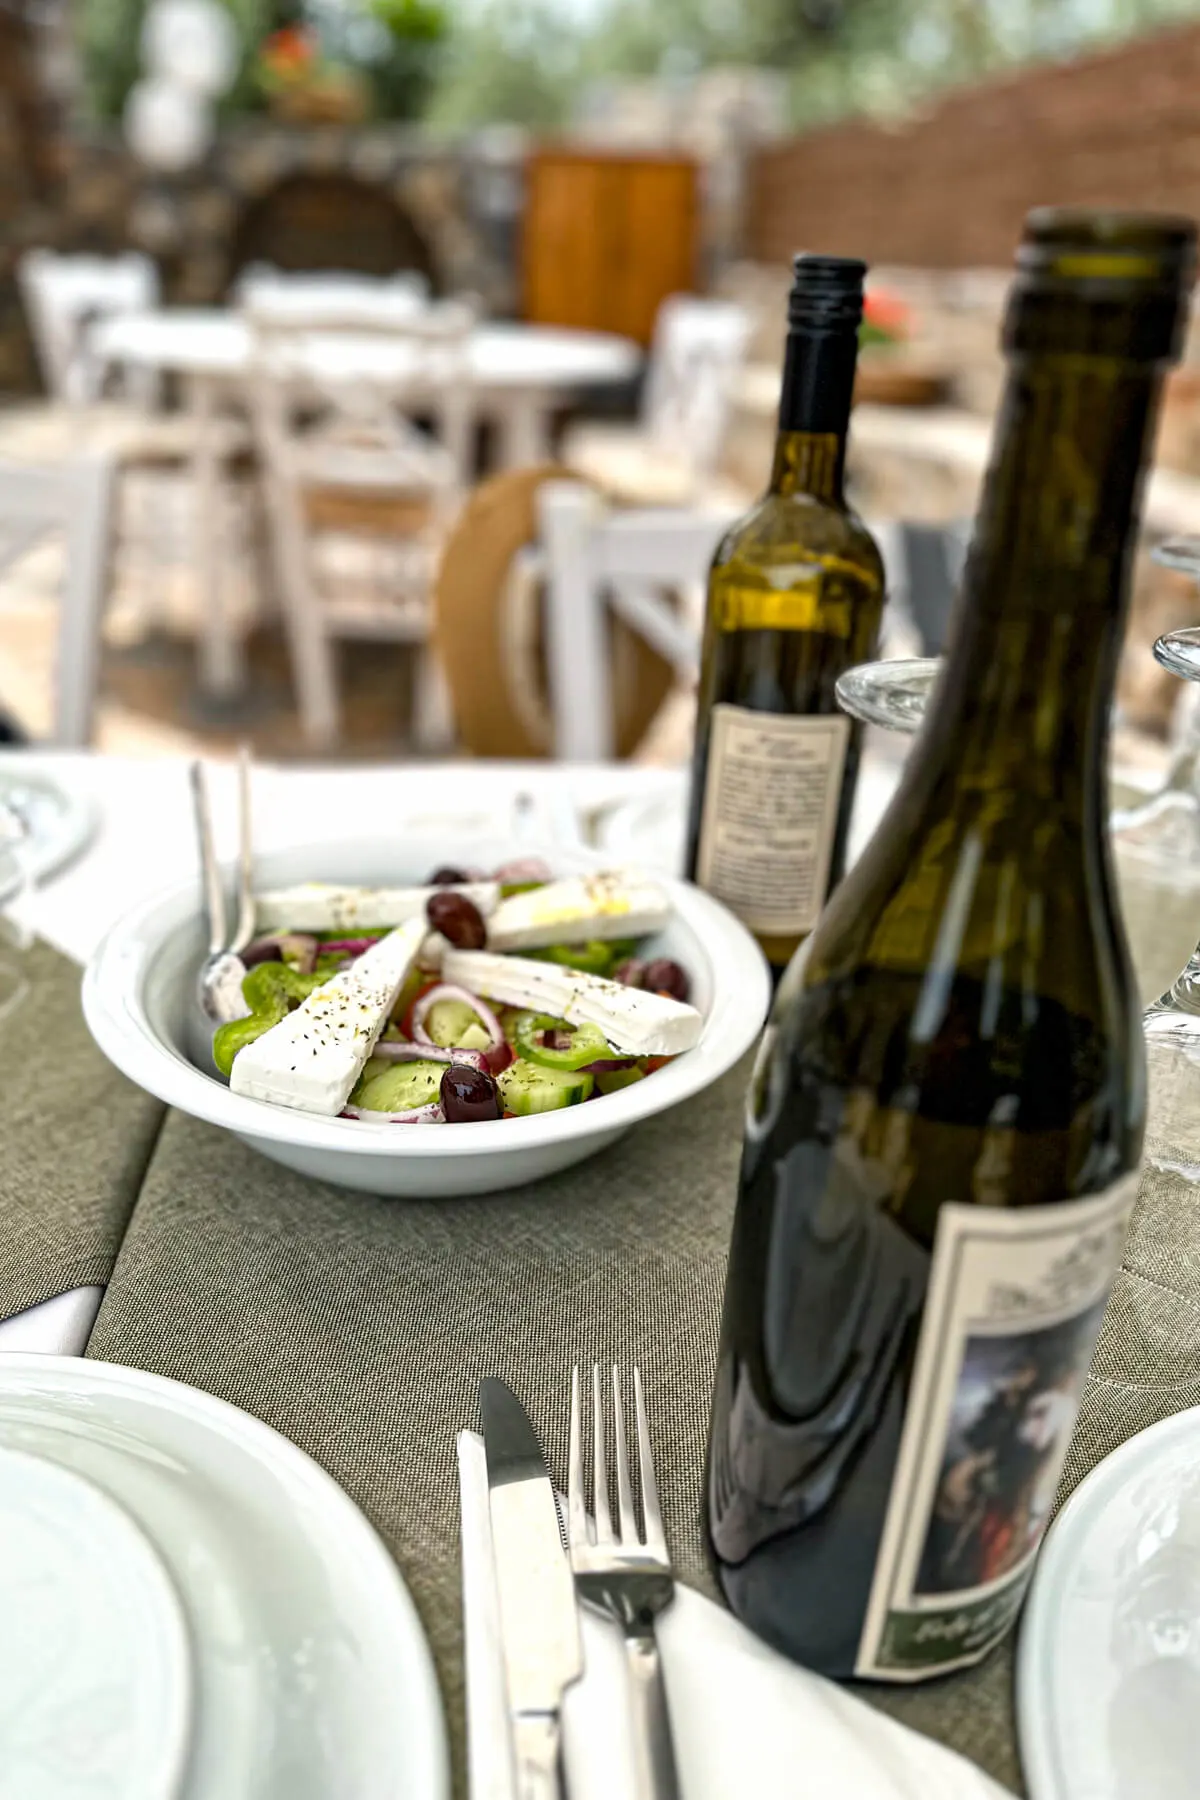 A Greek cucumber salad on a set table outdoors with wine bottles and tables in the background